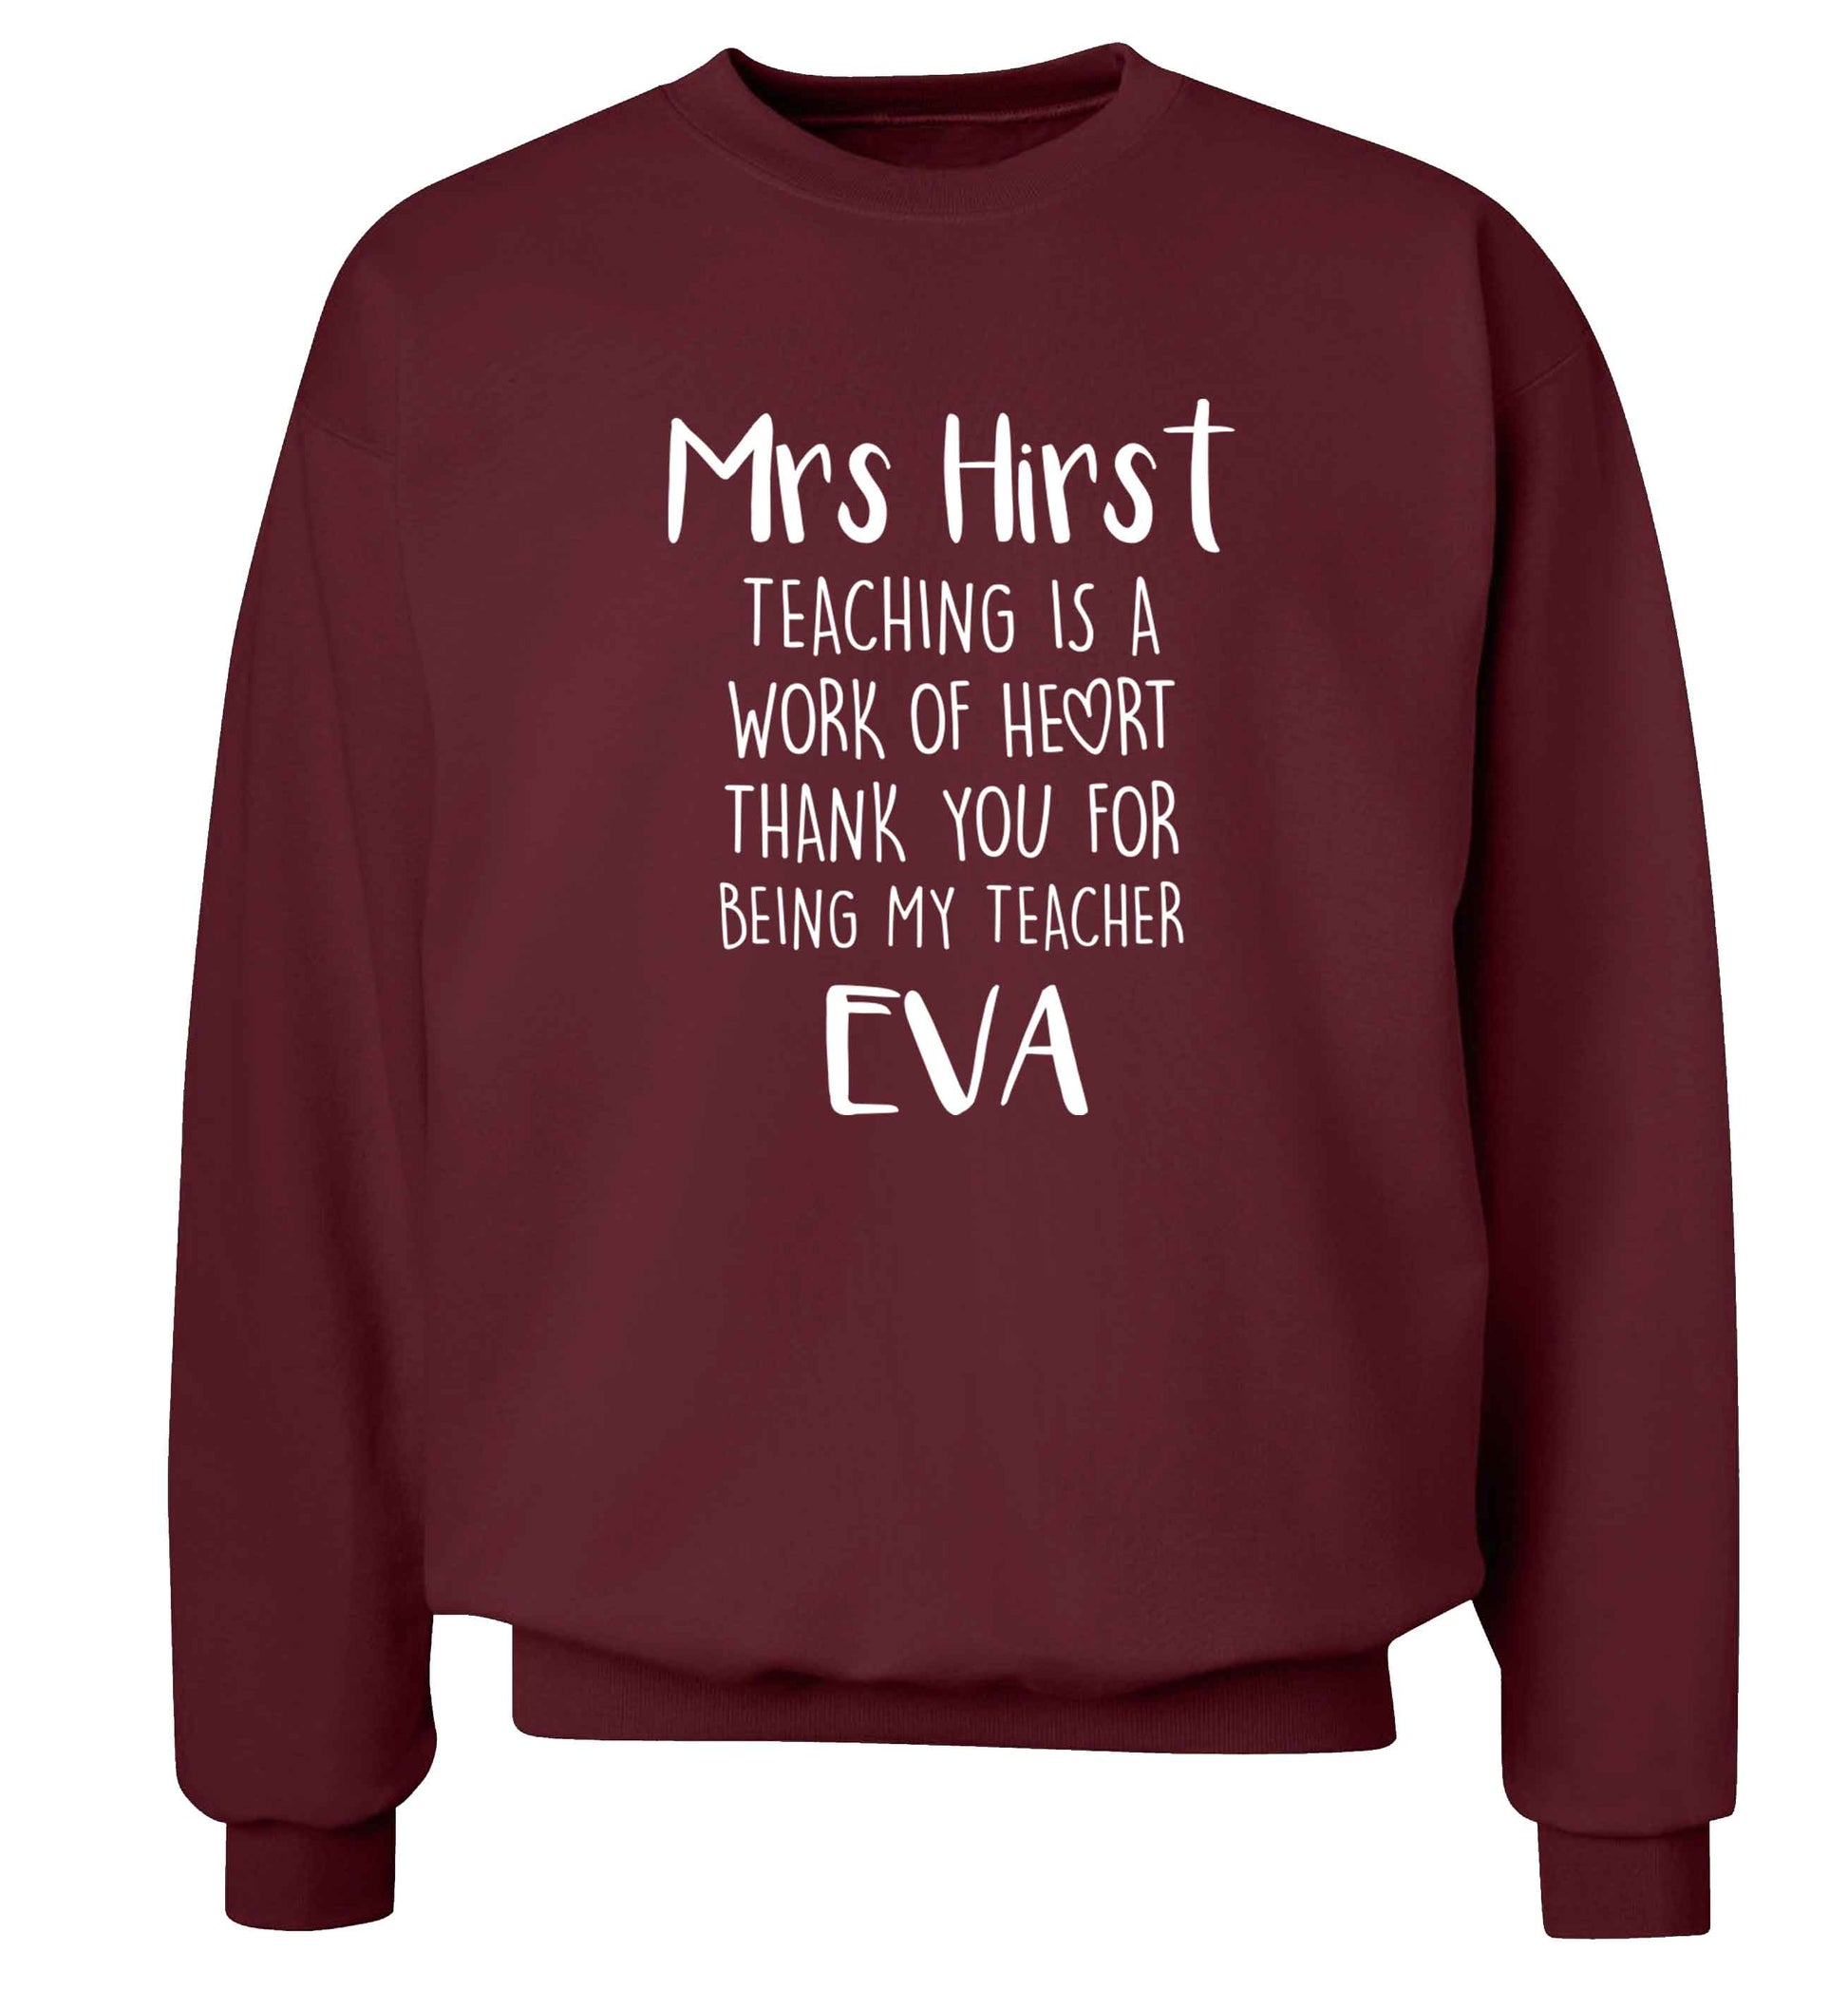 Personalised teaching is a work of heart thank you for being my teacher Adult's unisex maroon Sweater 2XL